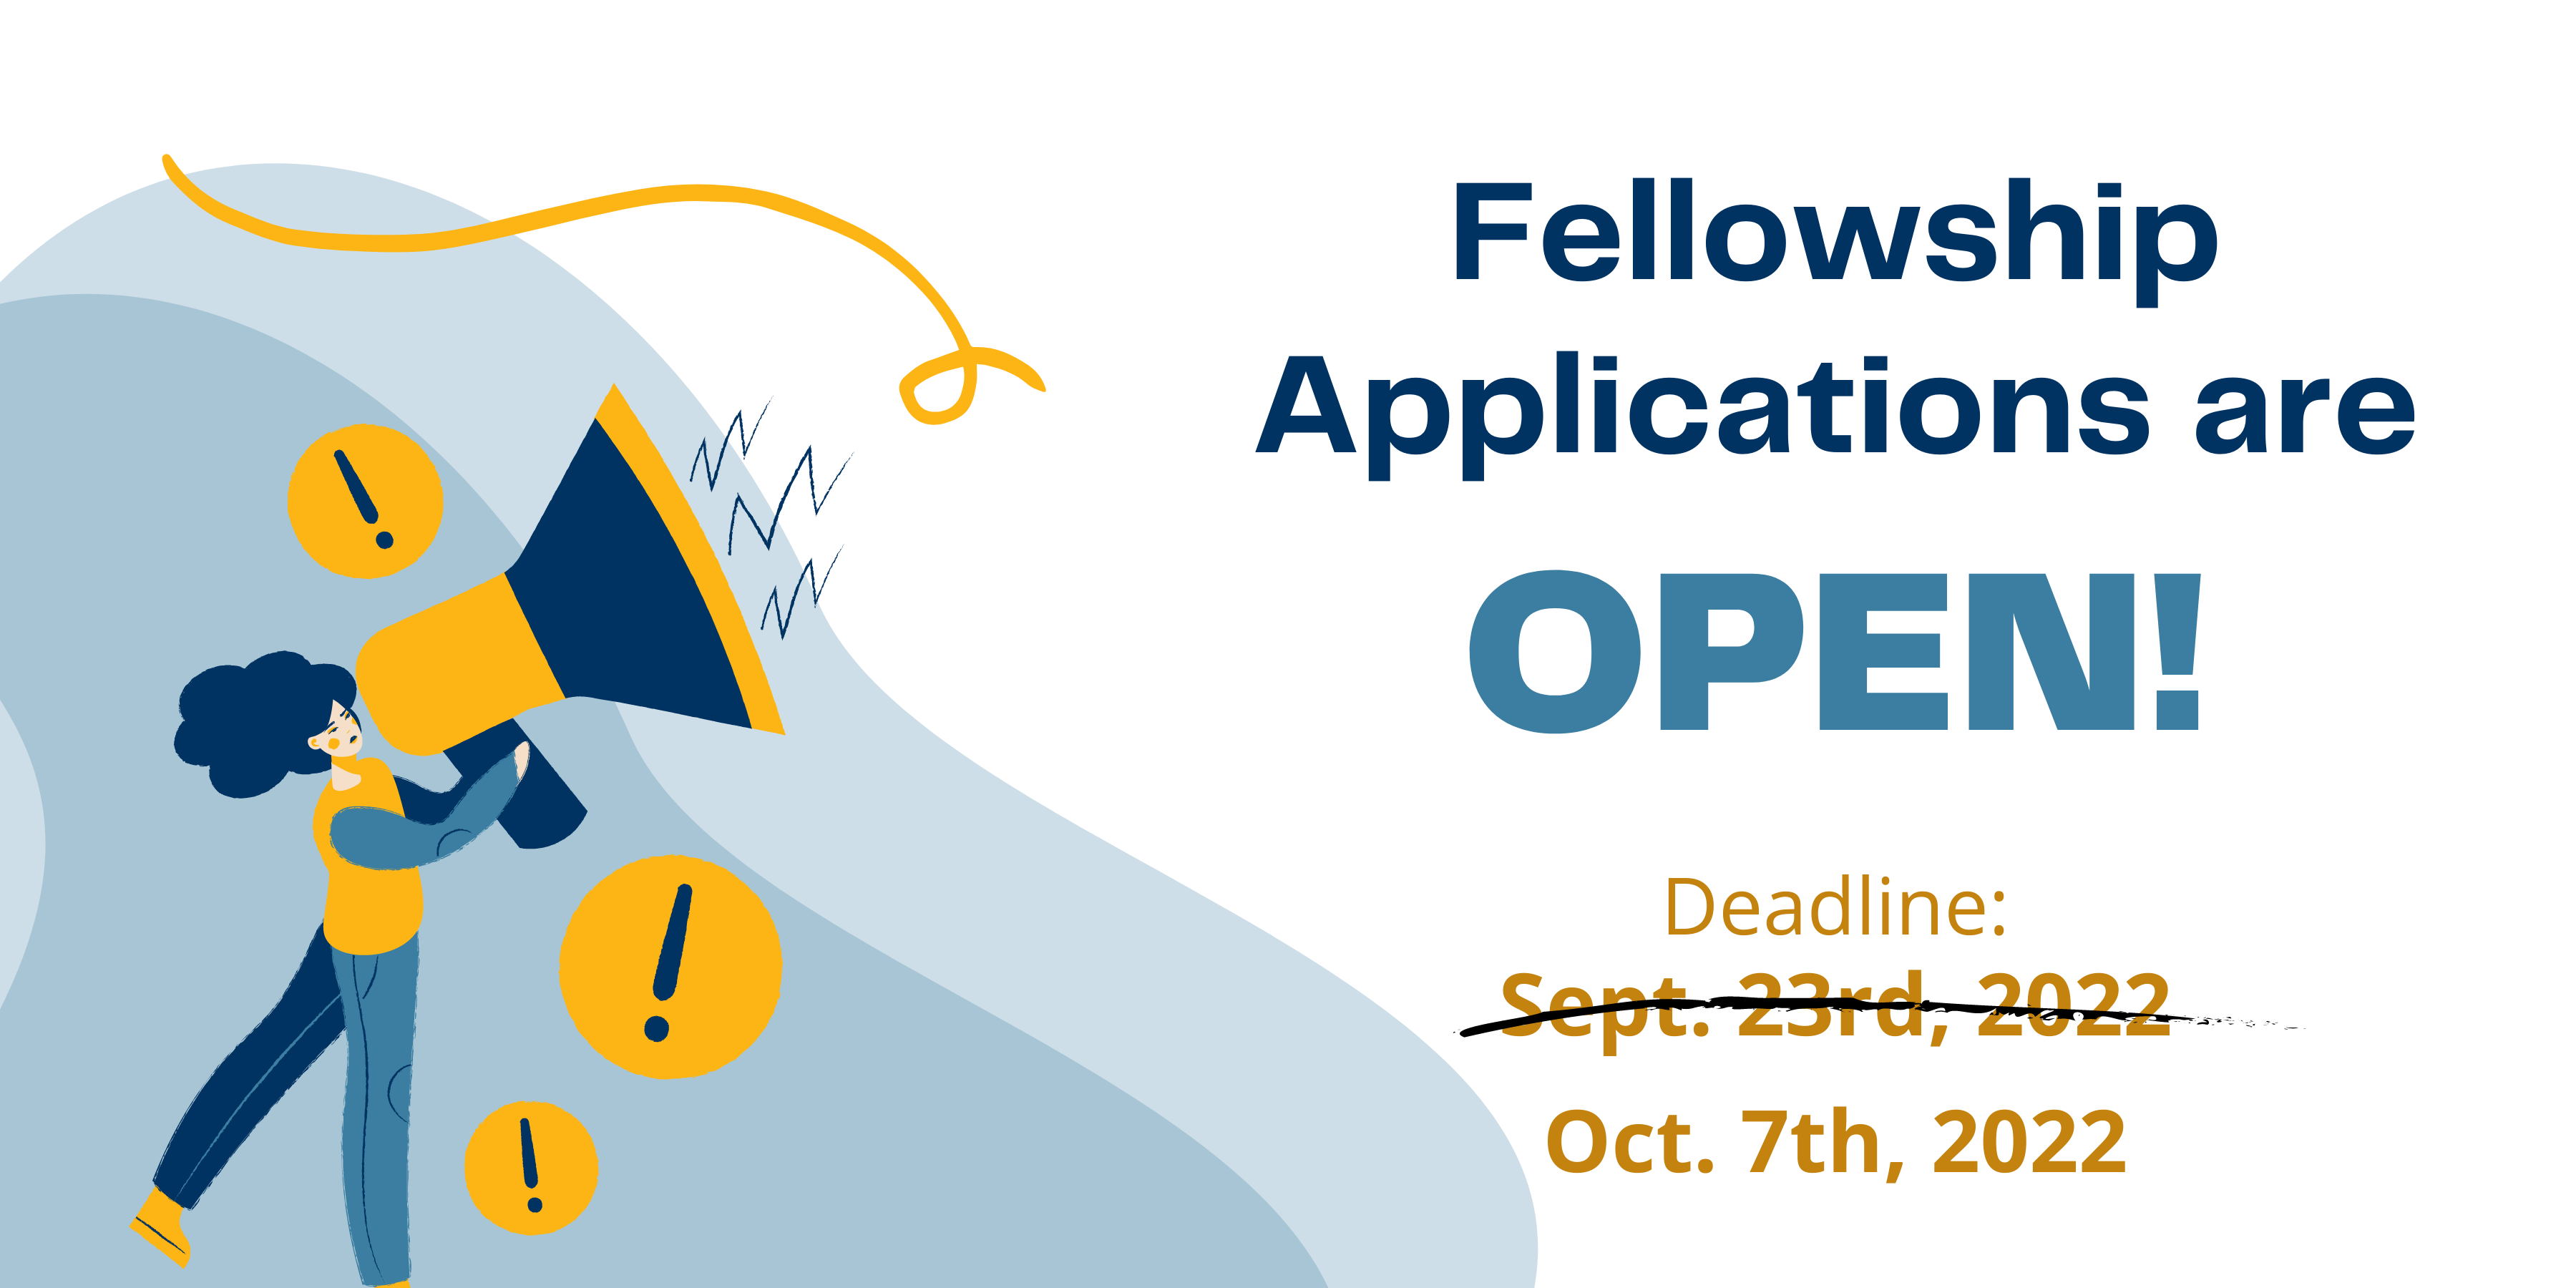 Kavli Center fellowship applications are open and now due Oct 7th